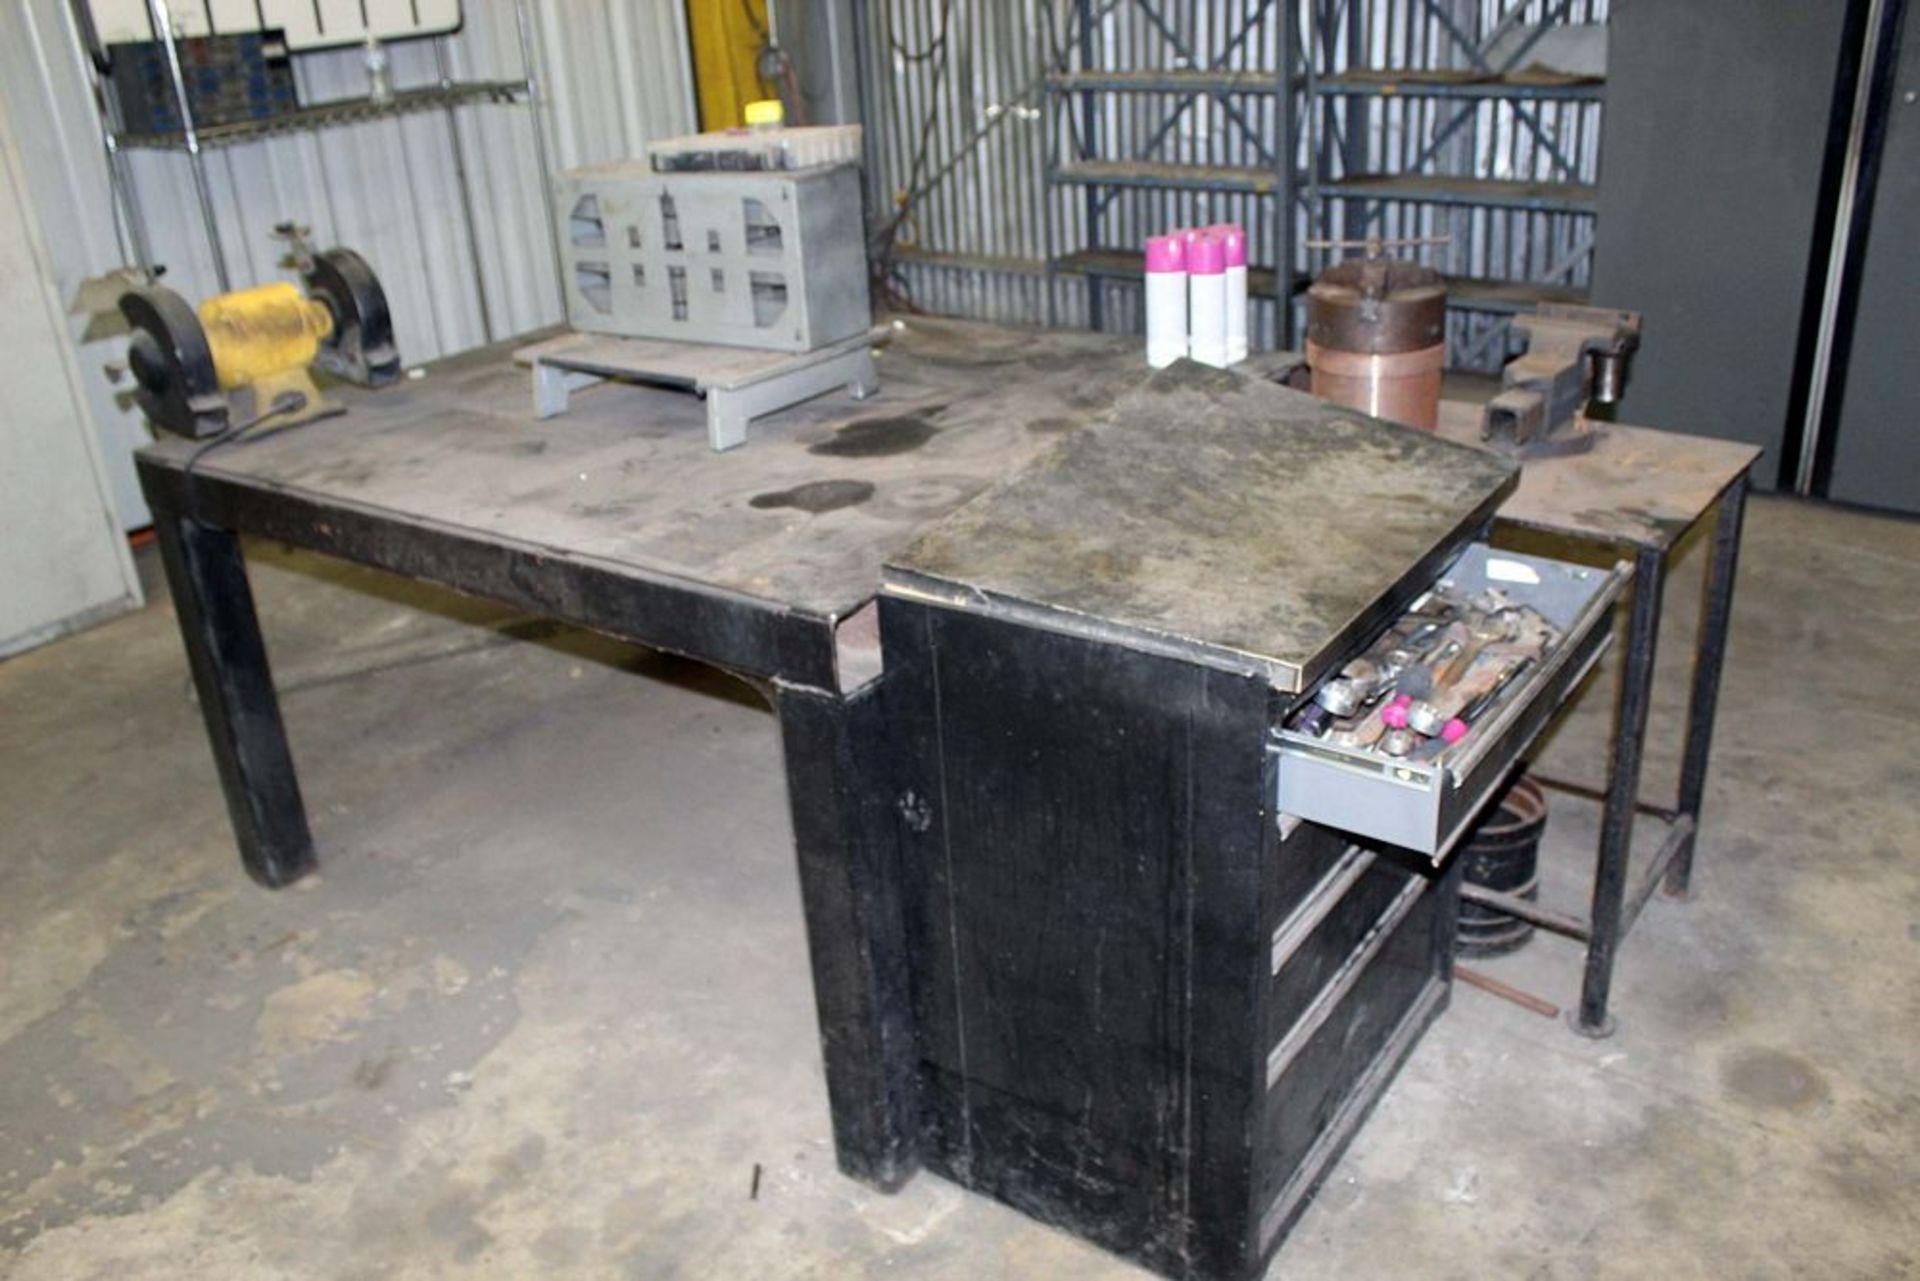 LOT CONSISTING OF: H.D work table, toolbox, double end grinder, vise